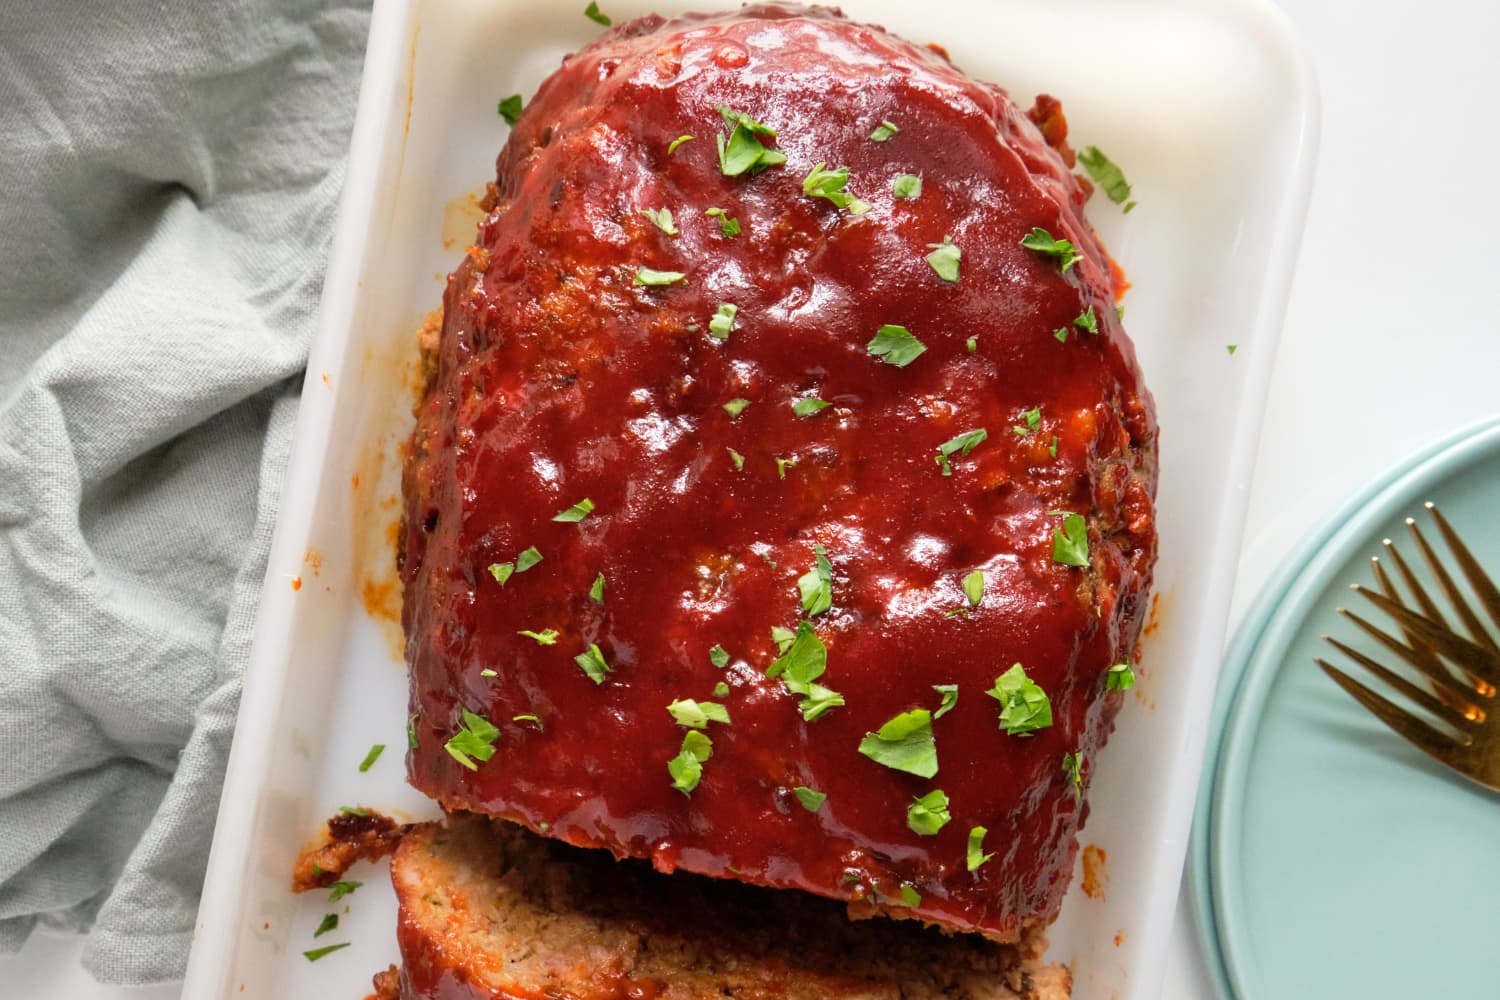 This One Ingredient Takes Basic Meatloaf to a Complete New Stage